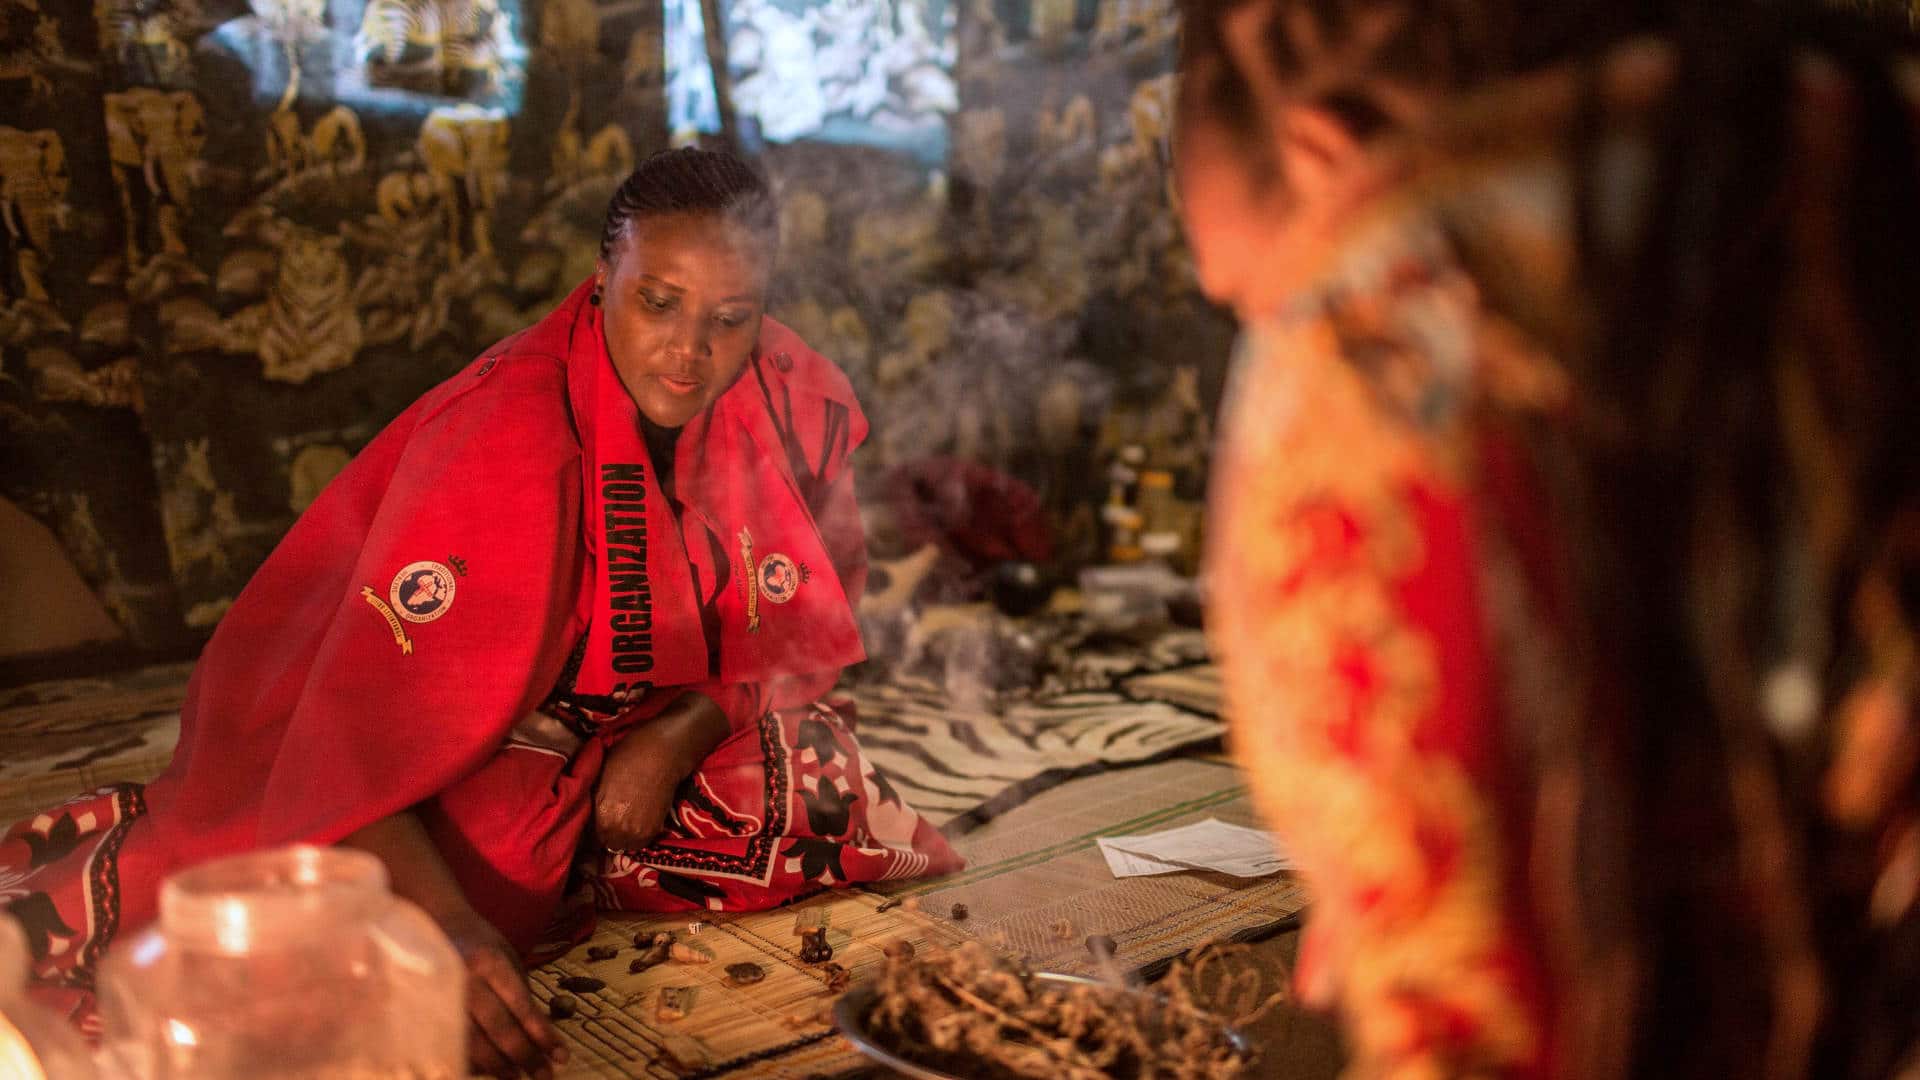 Bringing Traditional Healing Under the Microscope in South Africa